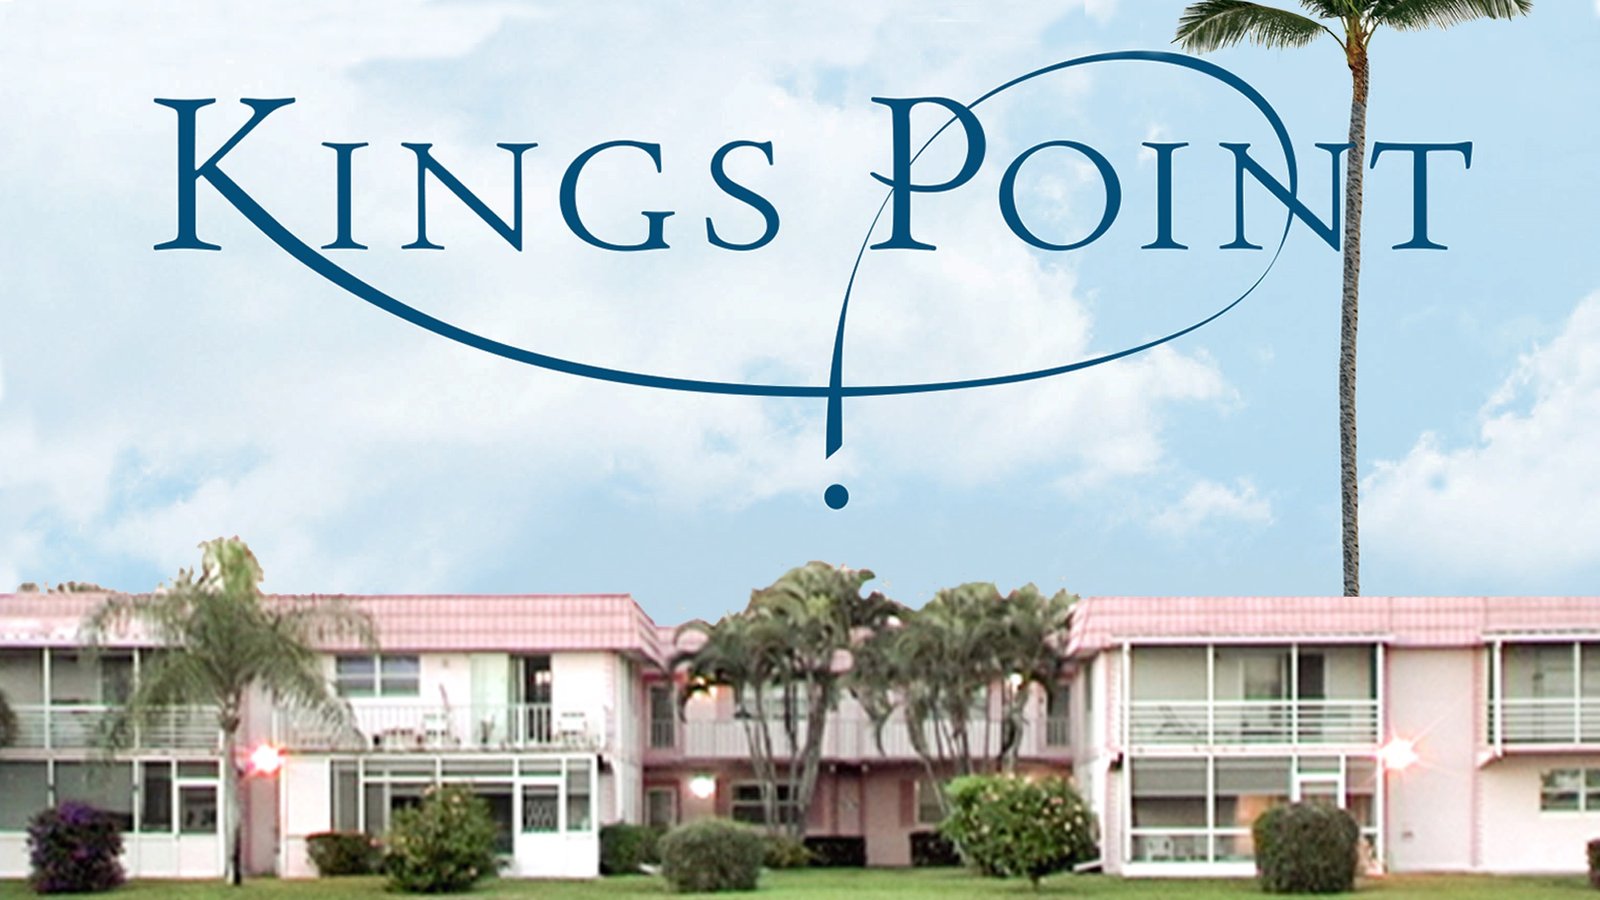 Kings Point - Elderly New Yorkers Migrating to Florida